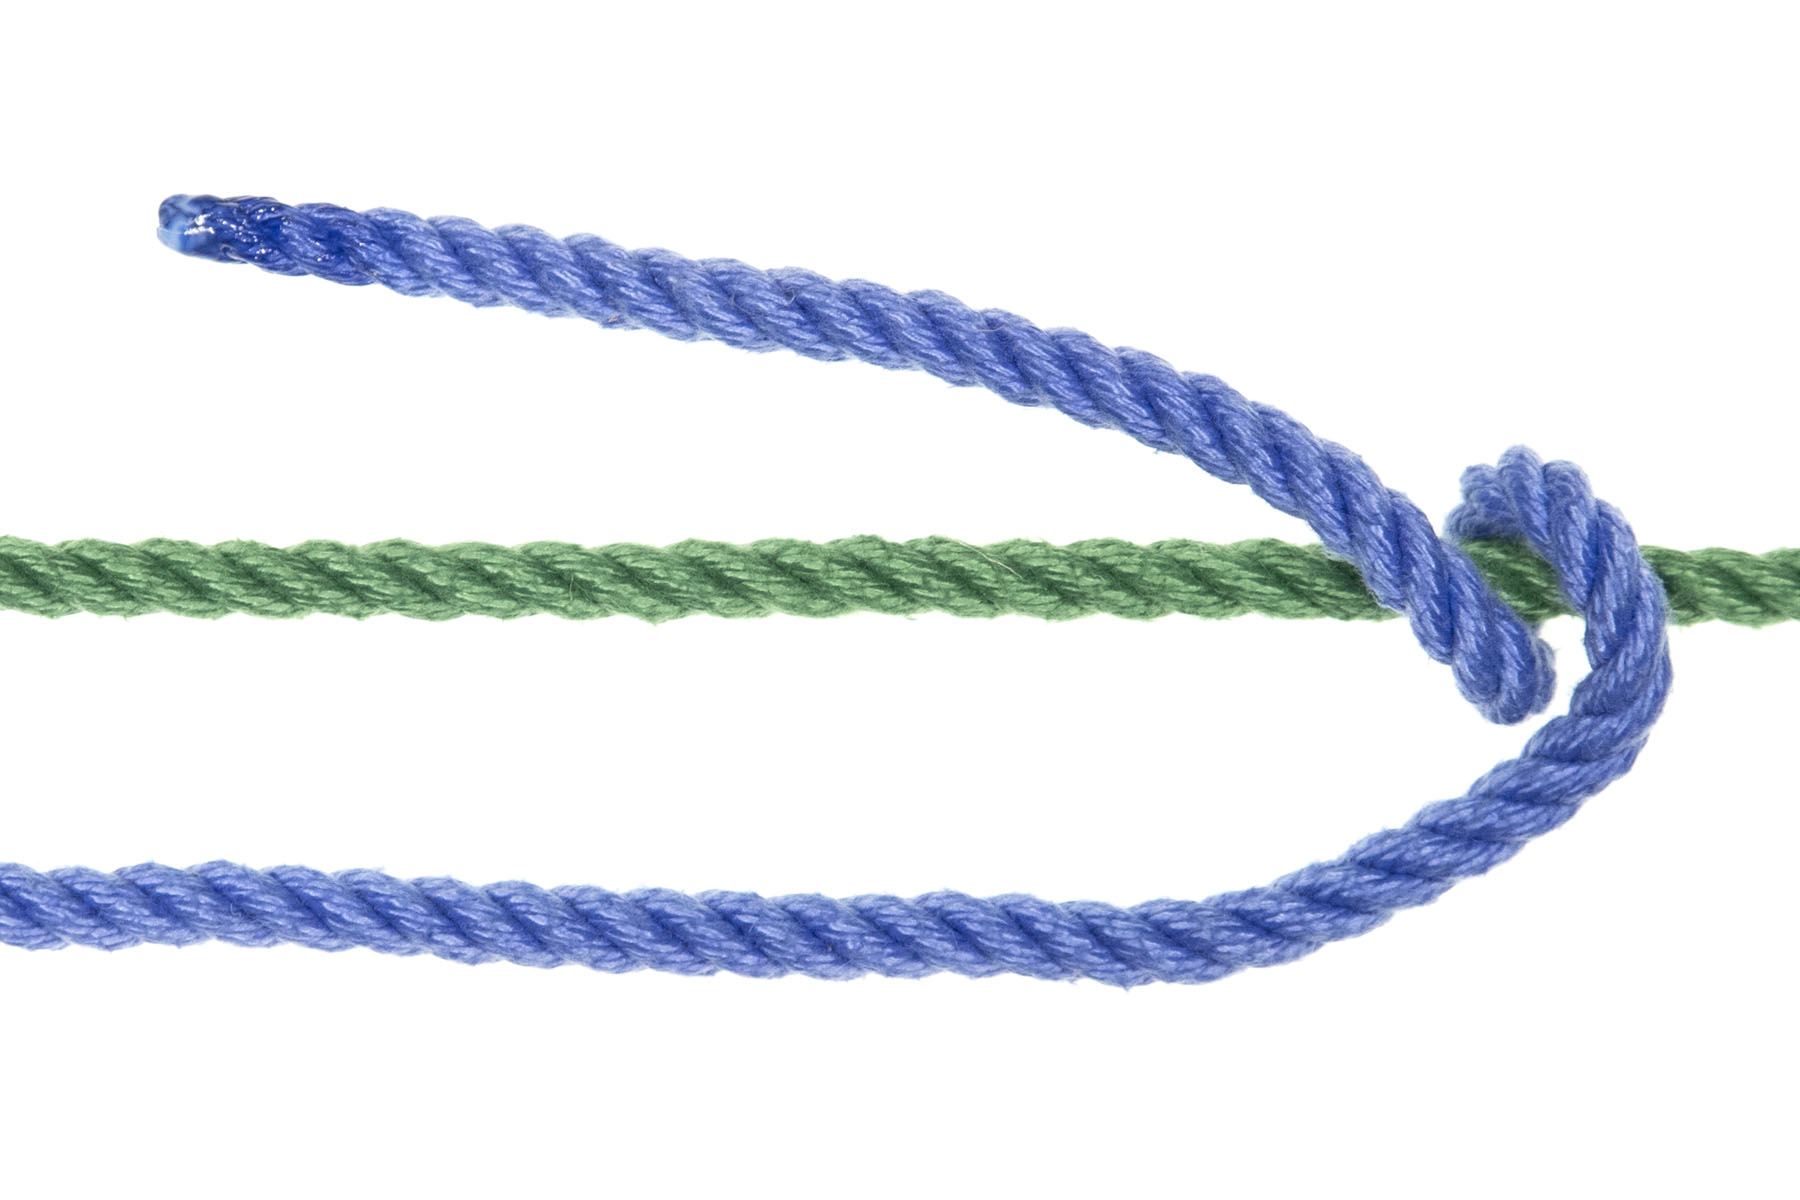 A green rope crosses the frame horizontally. A blue rope enters from the left and runs parallel to the green rope, one inch below it. Near the right edge of the frame, the blue rope crosses over the green rope and makes a full spiral around it, moving back toward the left. The blue rope goes over the green rope, under the green rope, and back over the green rope, with six inches of rope remaining and travelling back toward the left of the frame, one inch above the green rope.